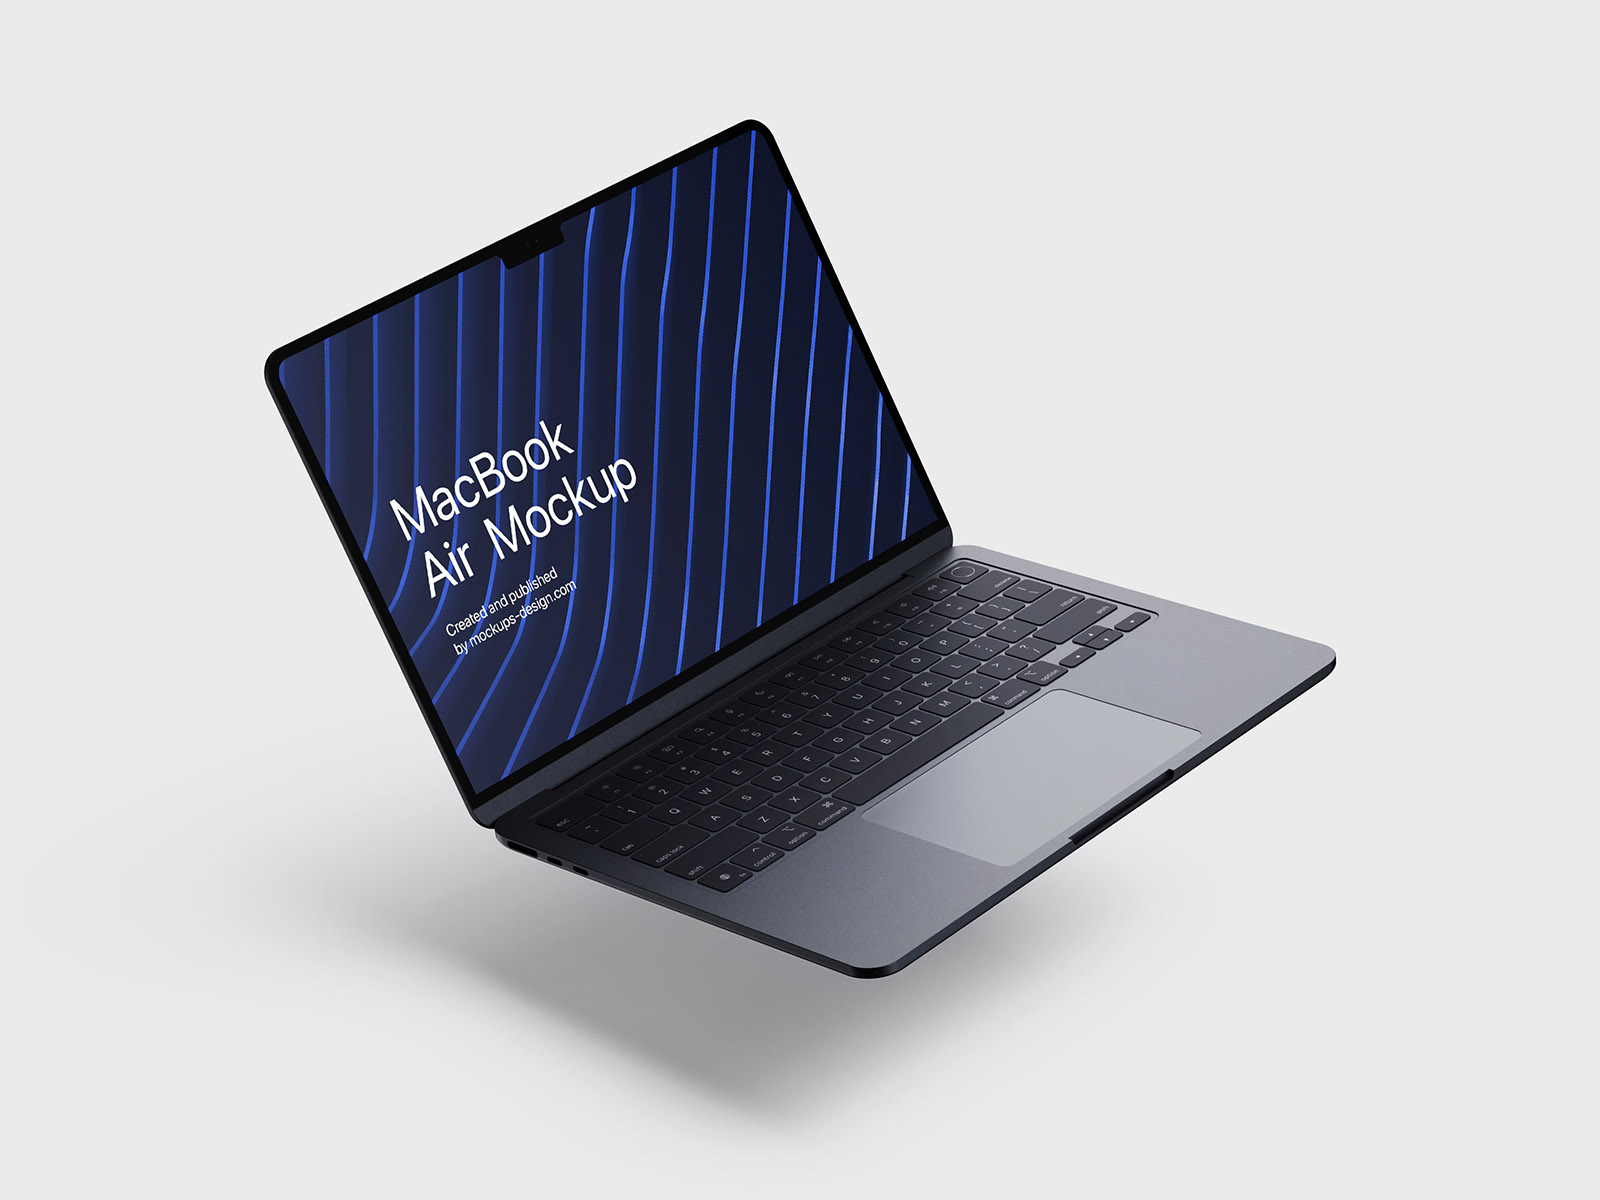 5 Mockups of Open MacBook Air from Different Angles FREE PSD